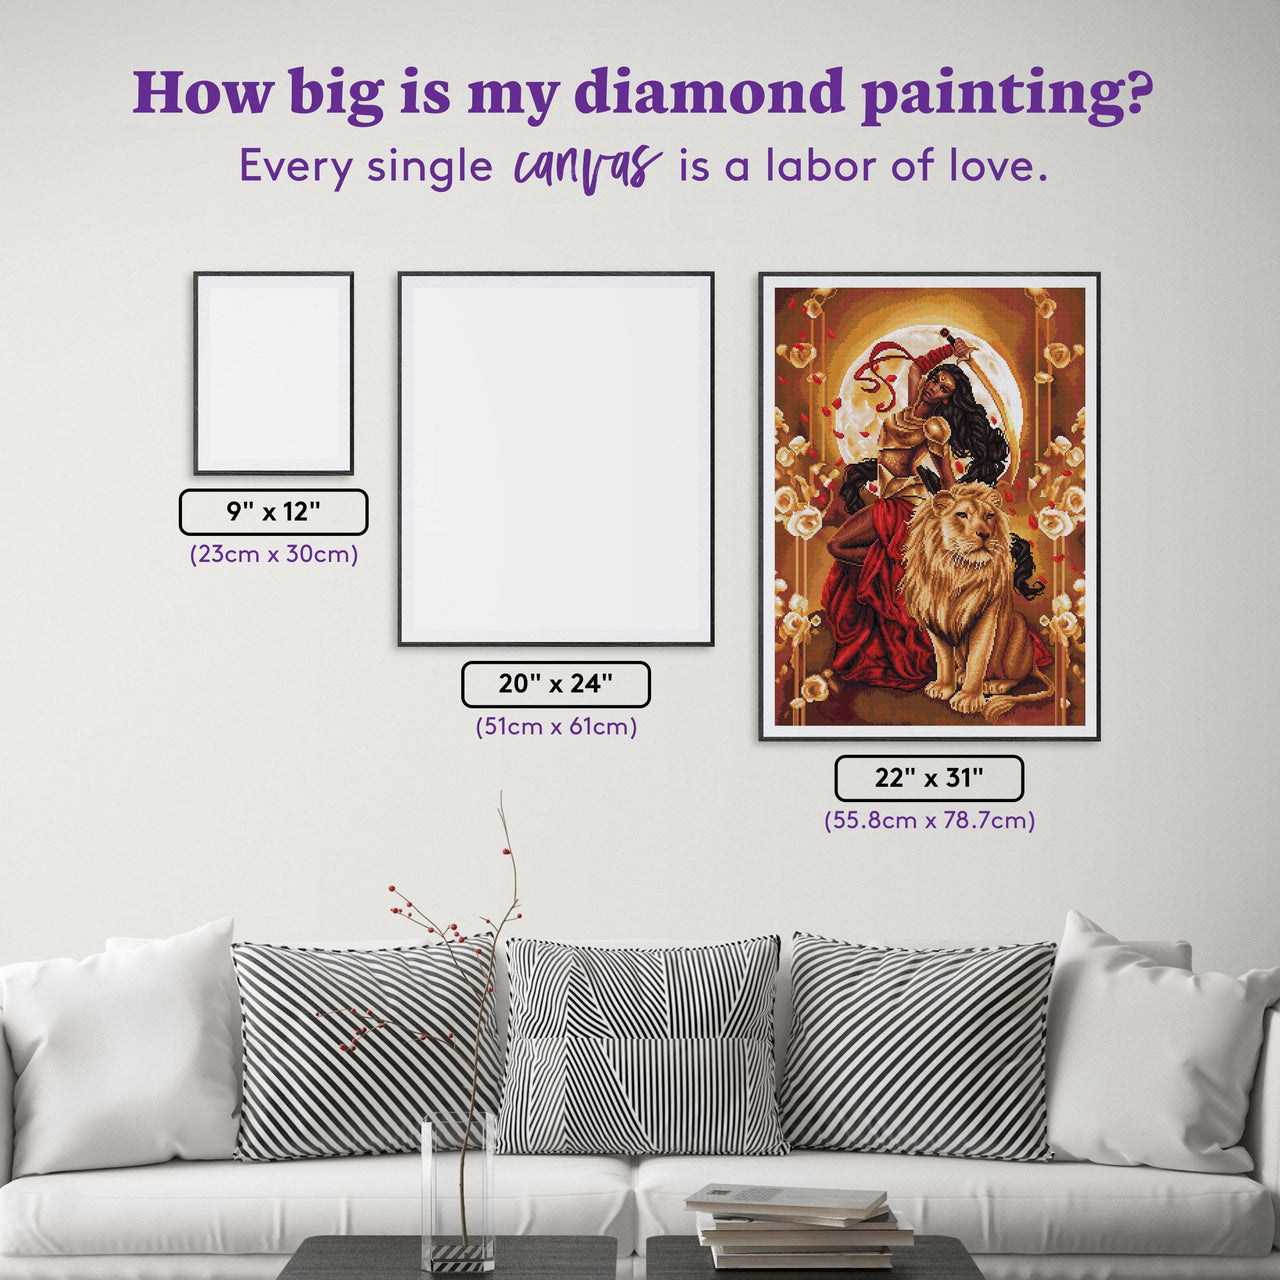 Diamond Painting Passion and Power 22" x 31" (55.8cm x 78.7cm) / Square With 32 Colors Including 4 ABs / 70,784